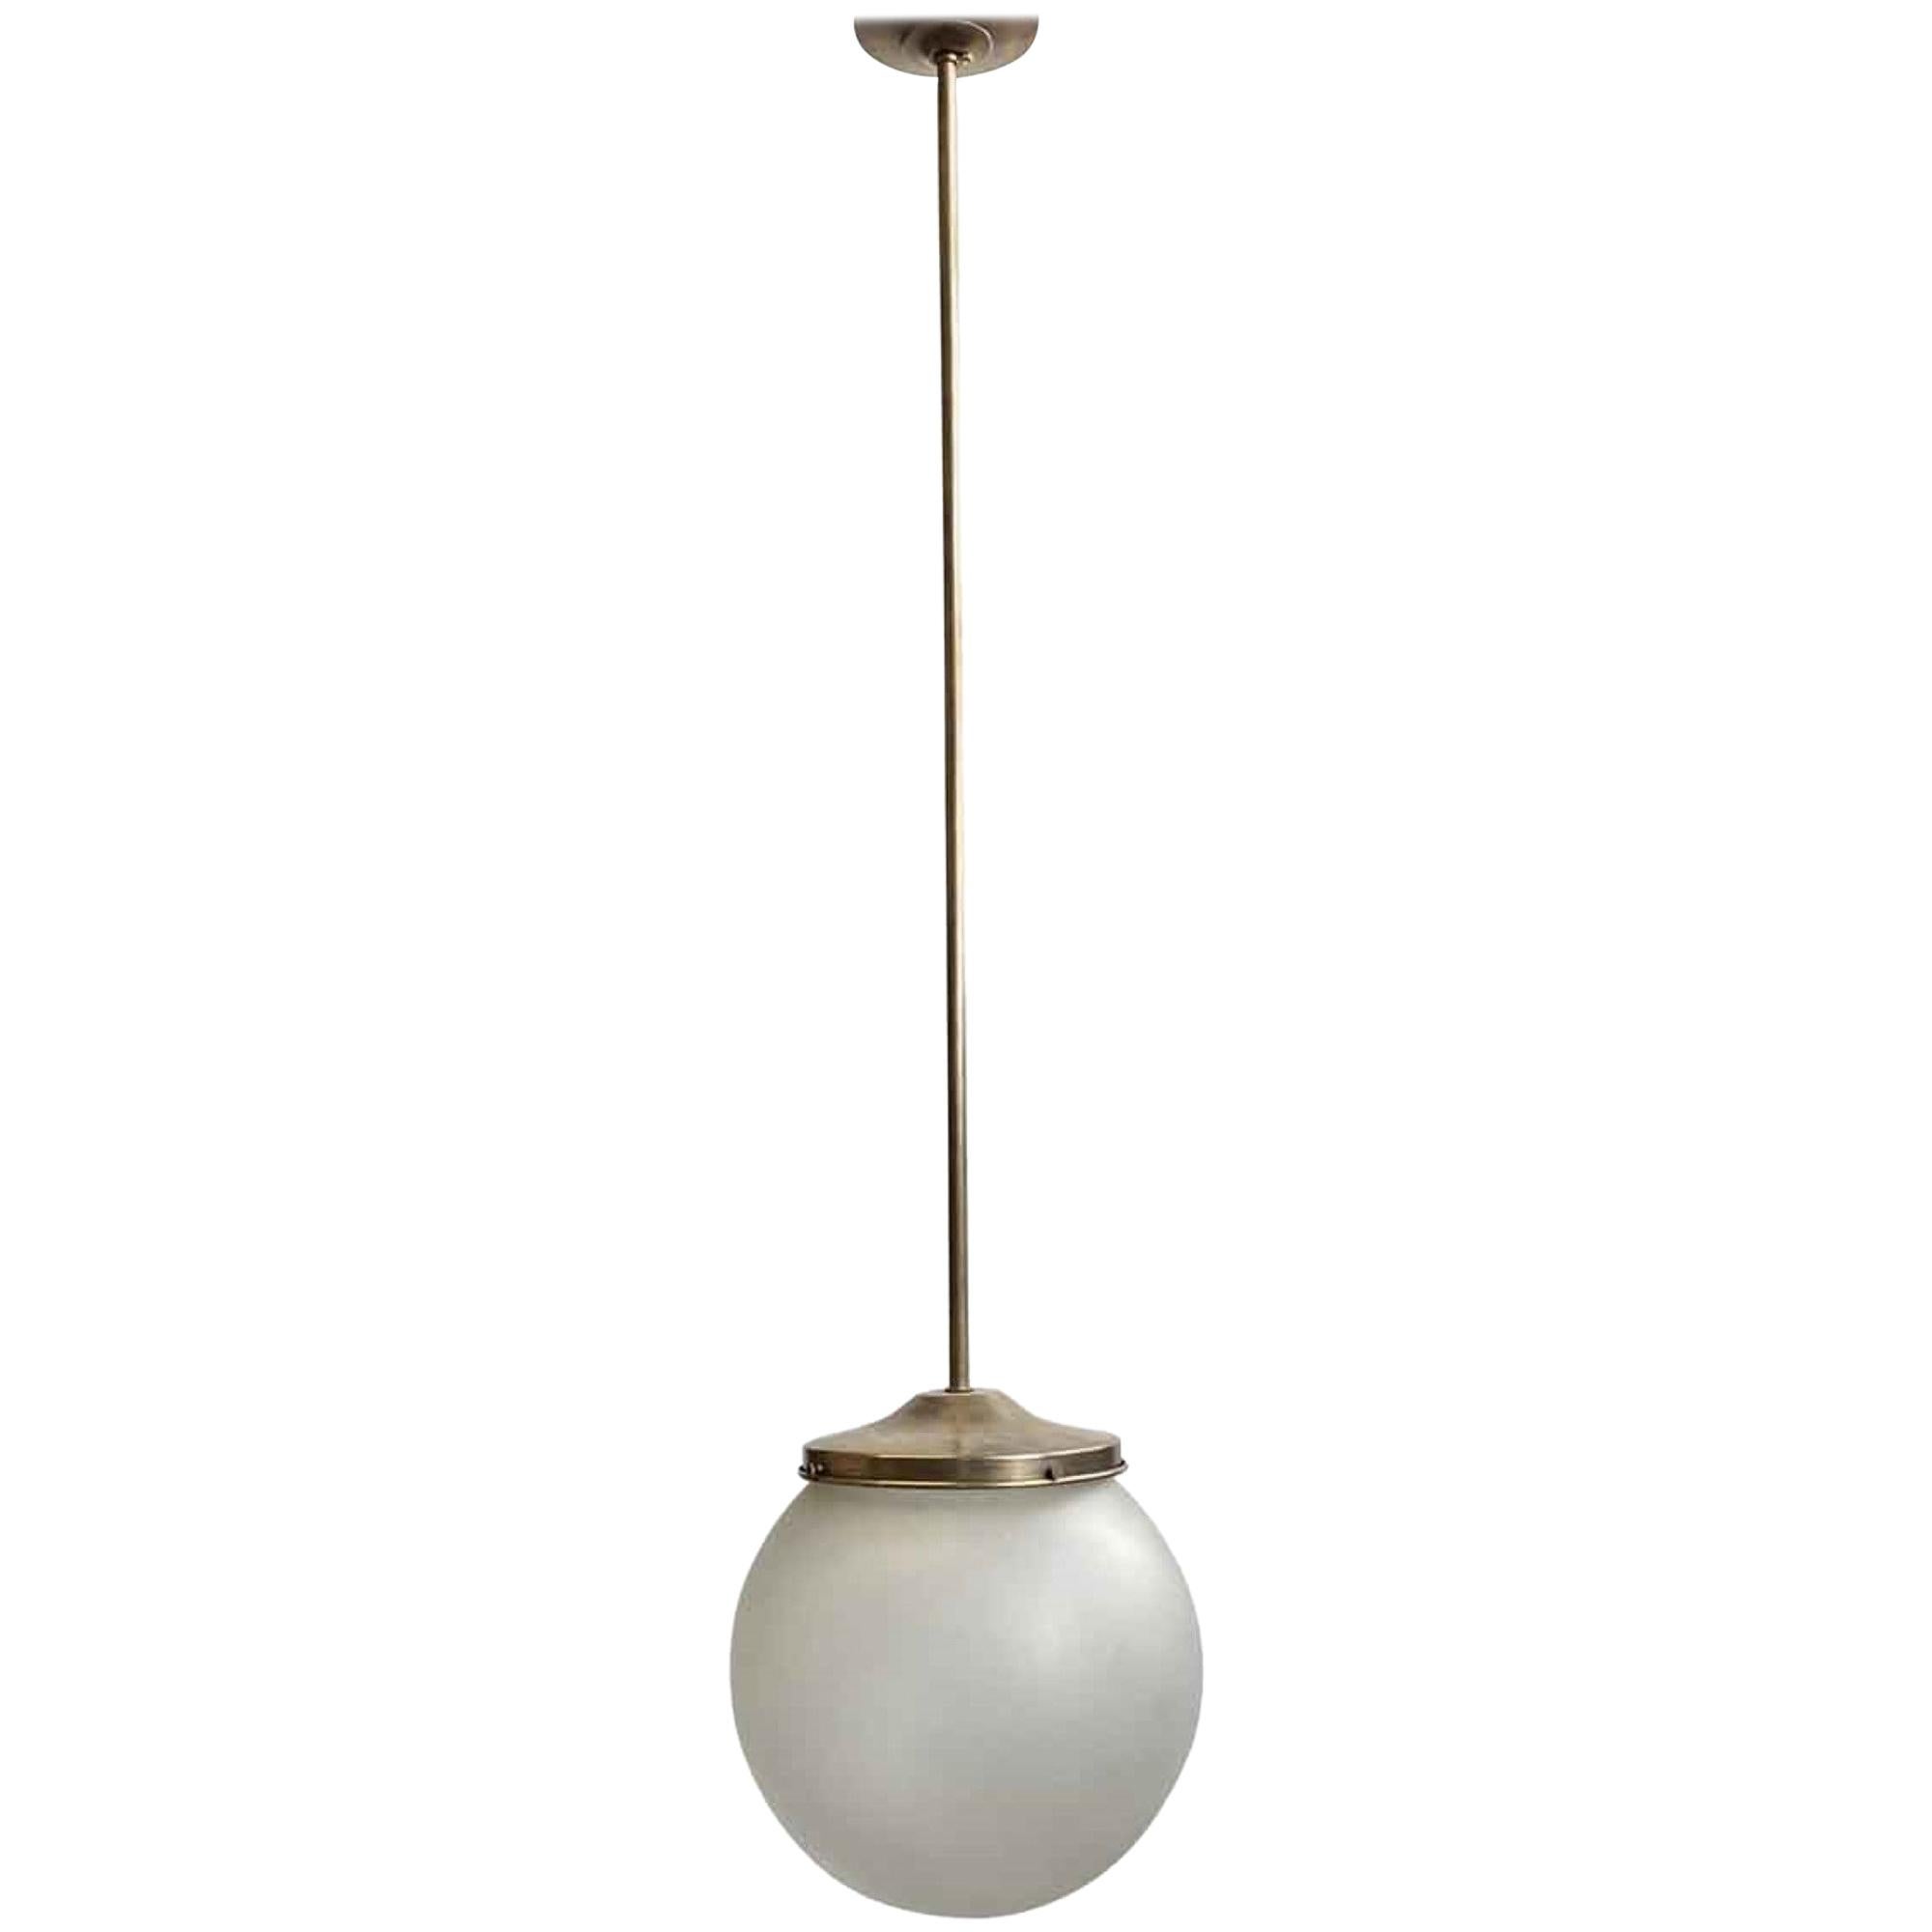 1940s Frosted Globe Pendant Light Antique Brass Finish Quantity Available